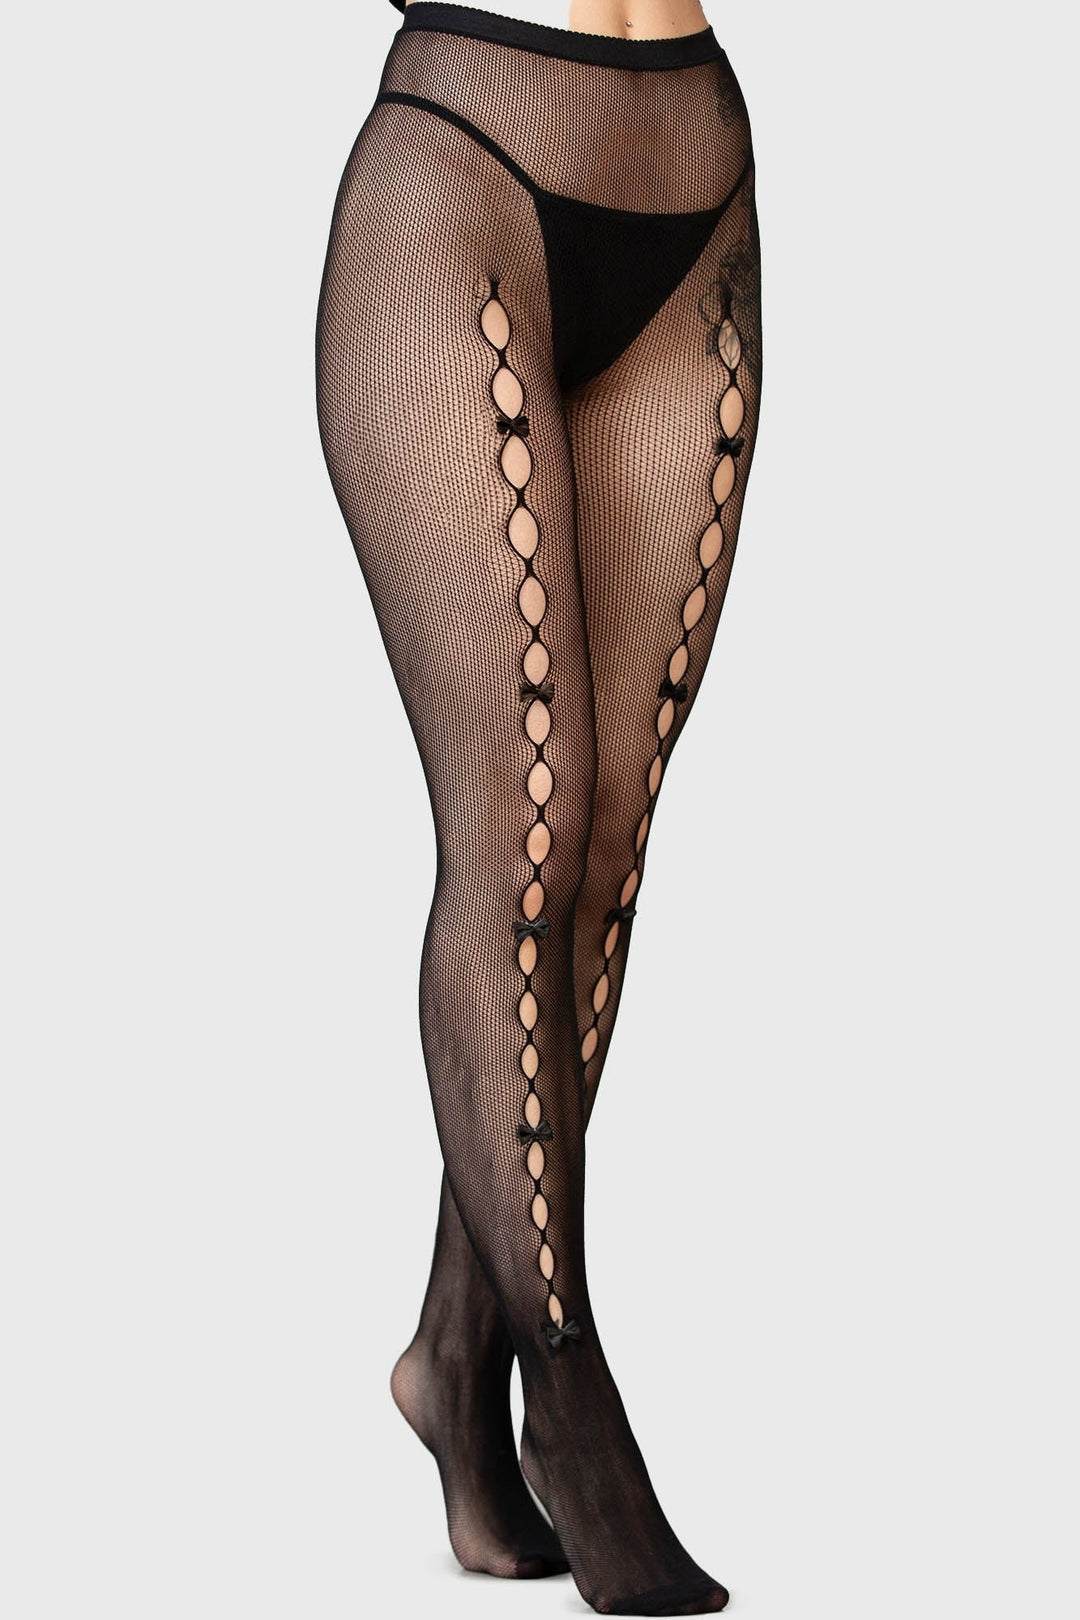 sexy gothic tights